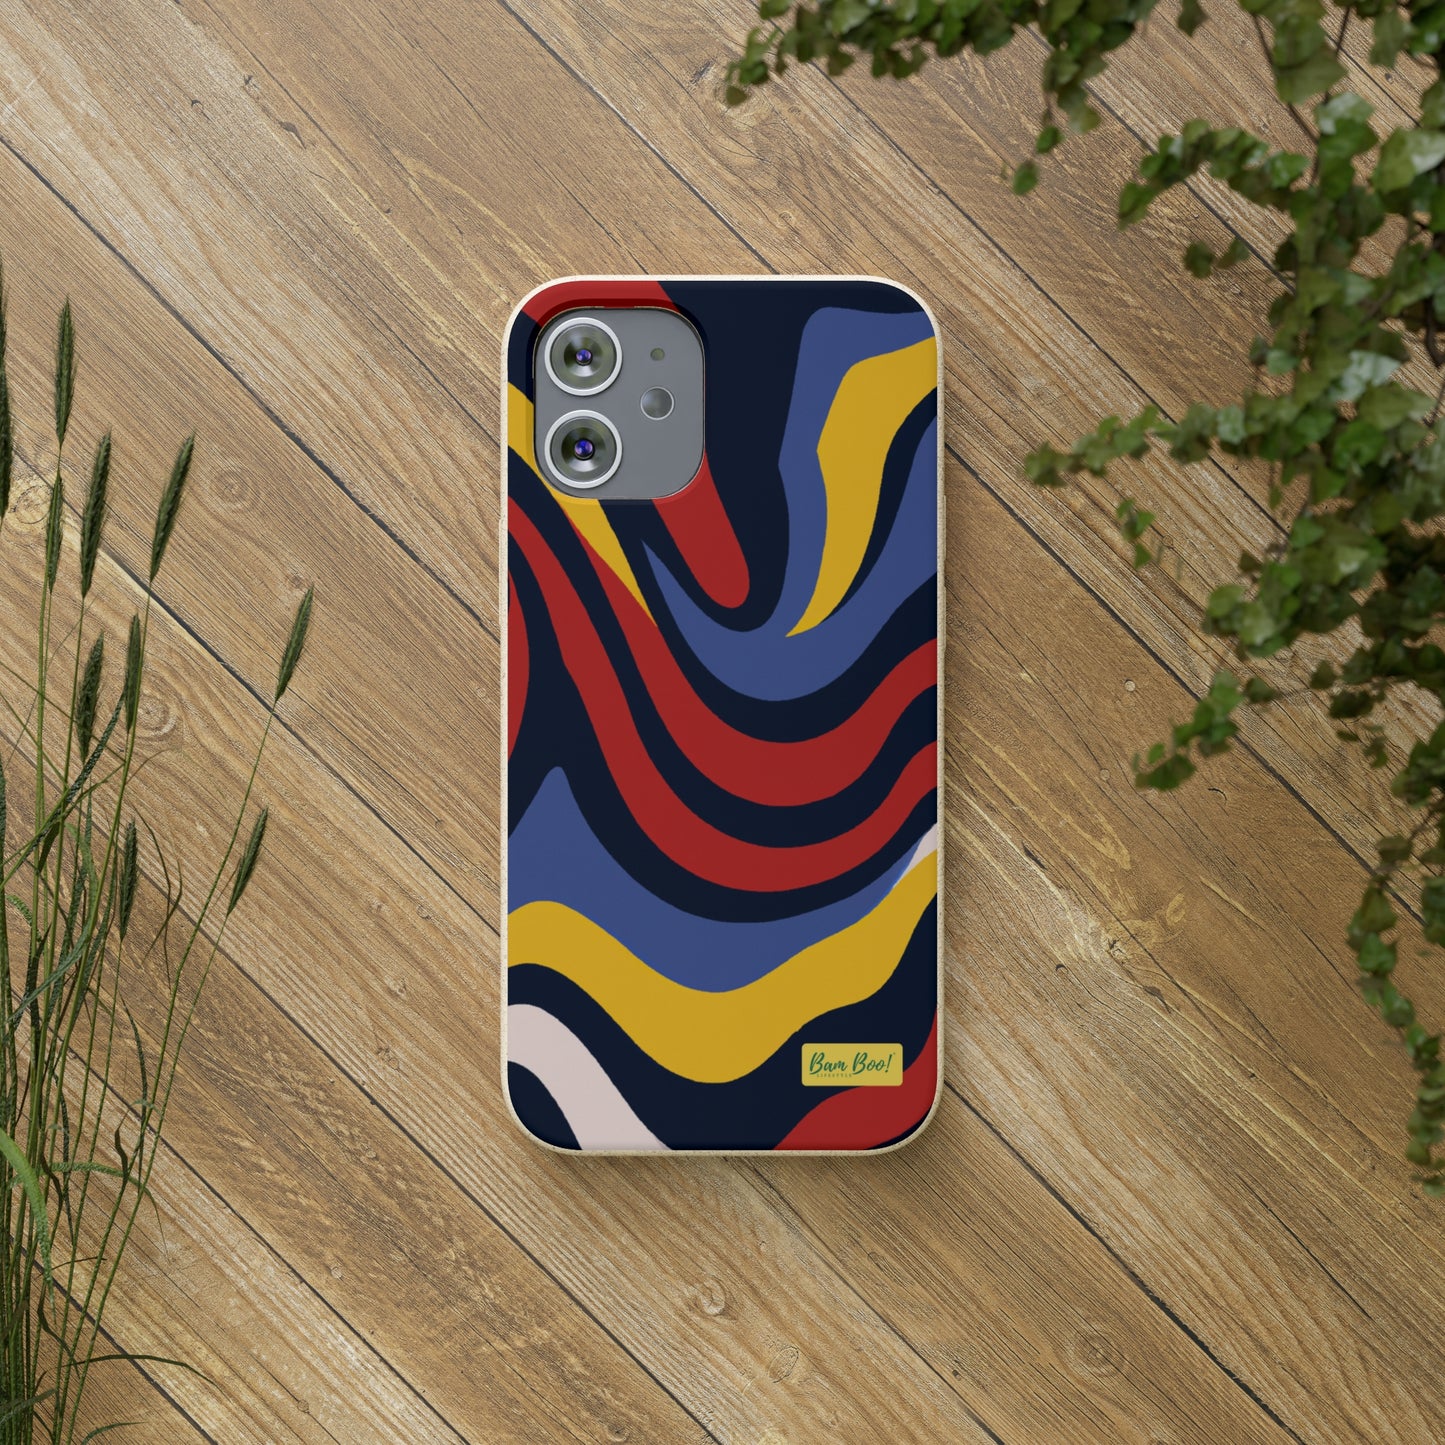 "Abstract Artistic Expression: Capturing Meaningful Emotion Through Color, Shape, and Line" - Bam Boo! Lifestyle Eco-friendly Cases